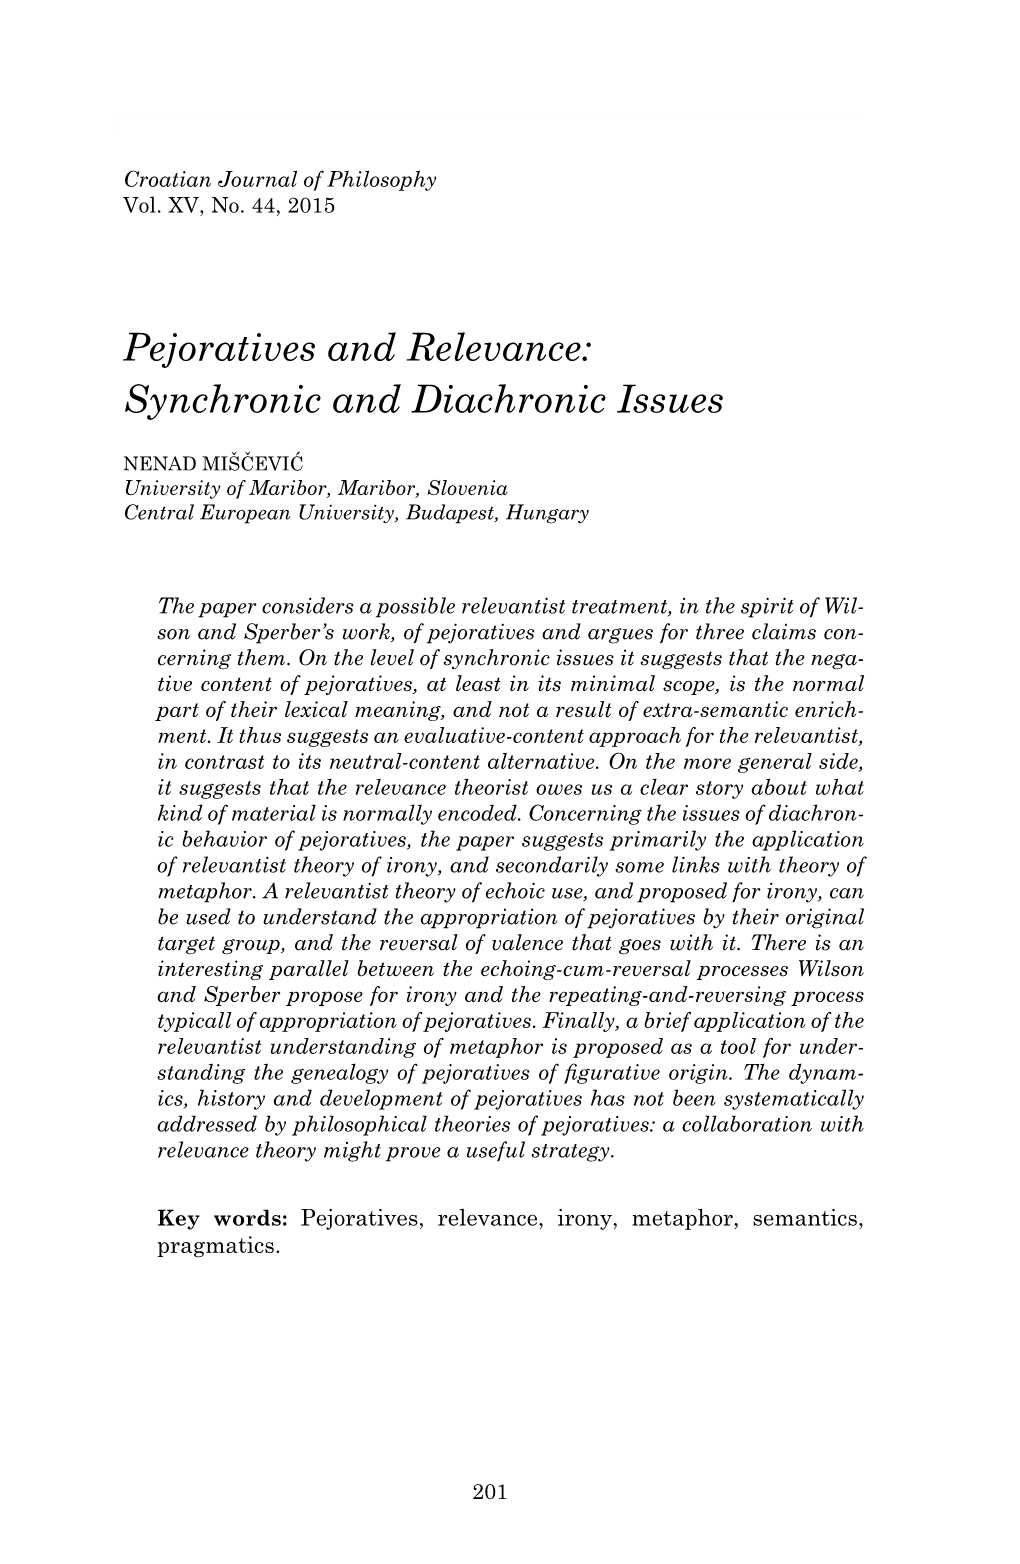 Pejoratives and Relevance: Synchronic and Diachronic Issues